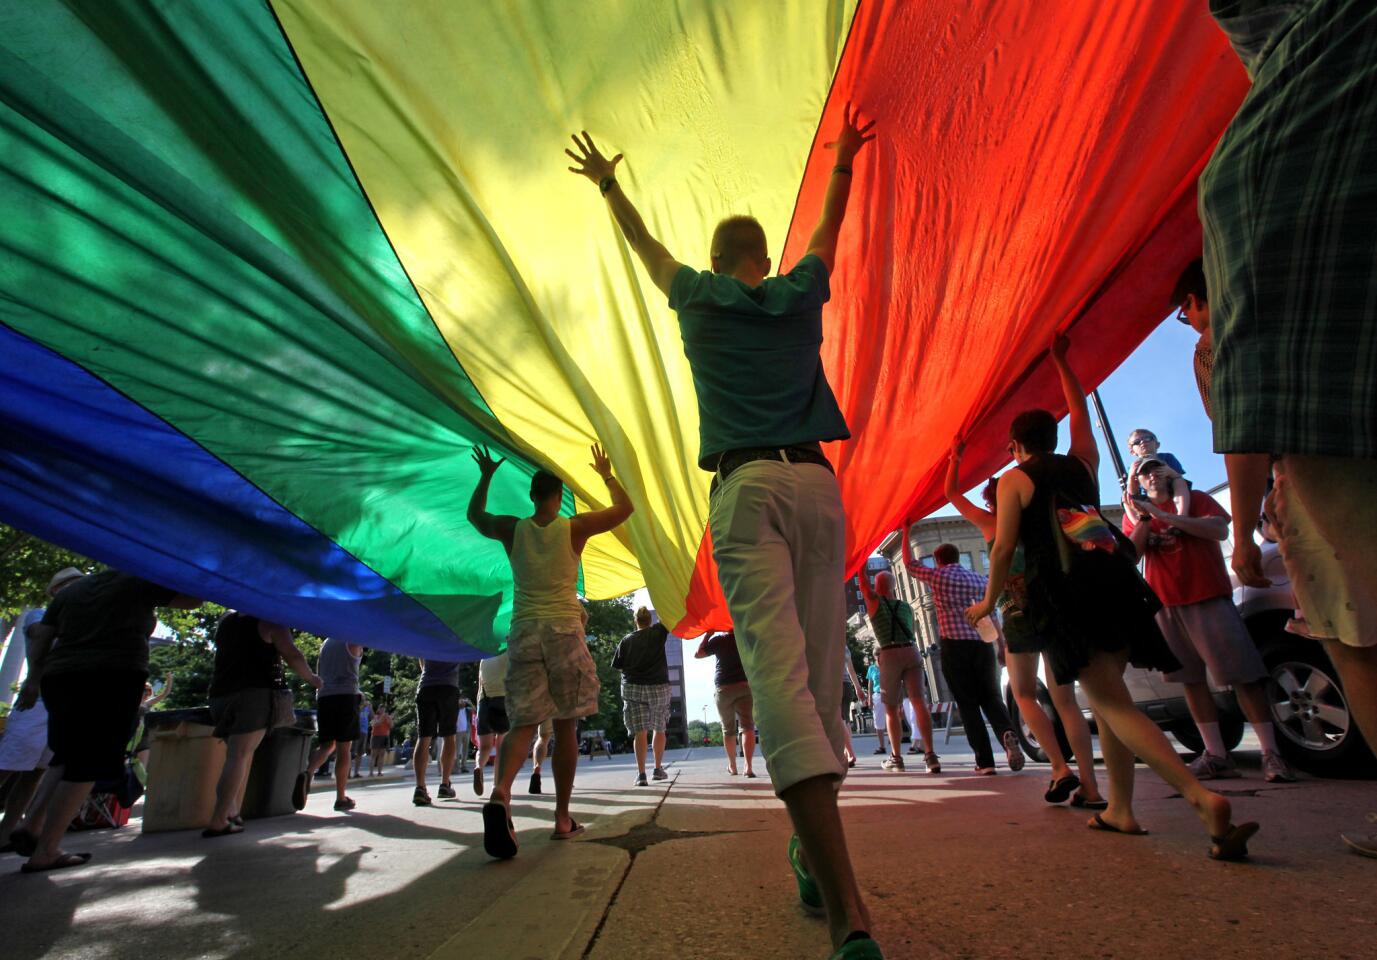 Supporters of a U.S. Supreme Court ruling which overturned the federal Defense of Marriage Act carry a large rainbow flag during a parade around the Wisconsin State Capitol in June, 2013.